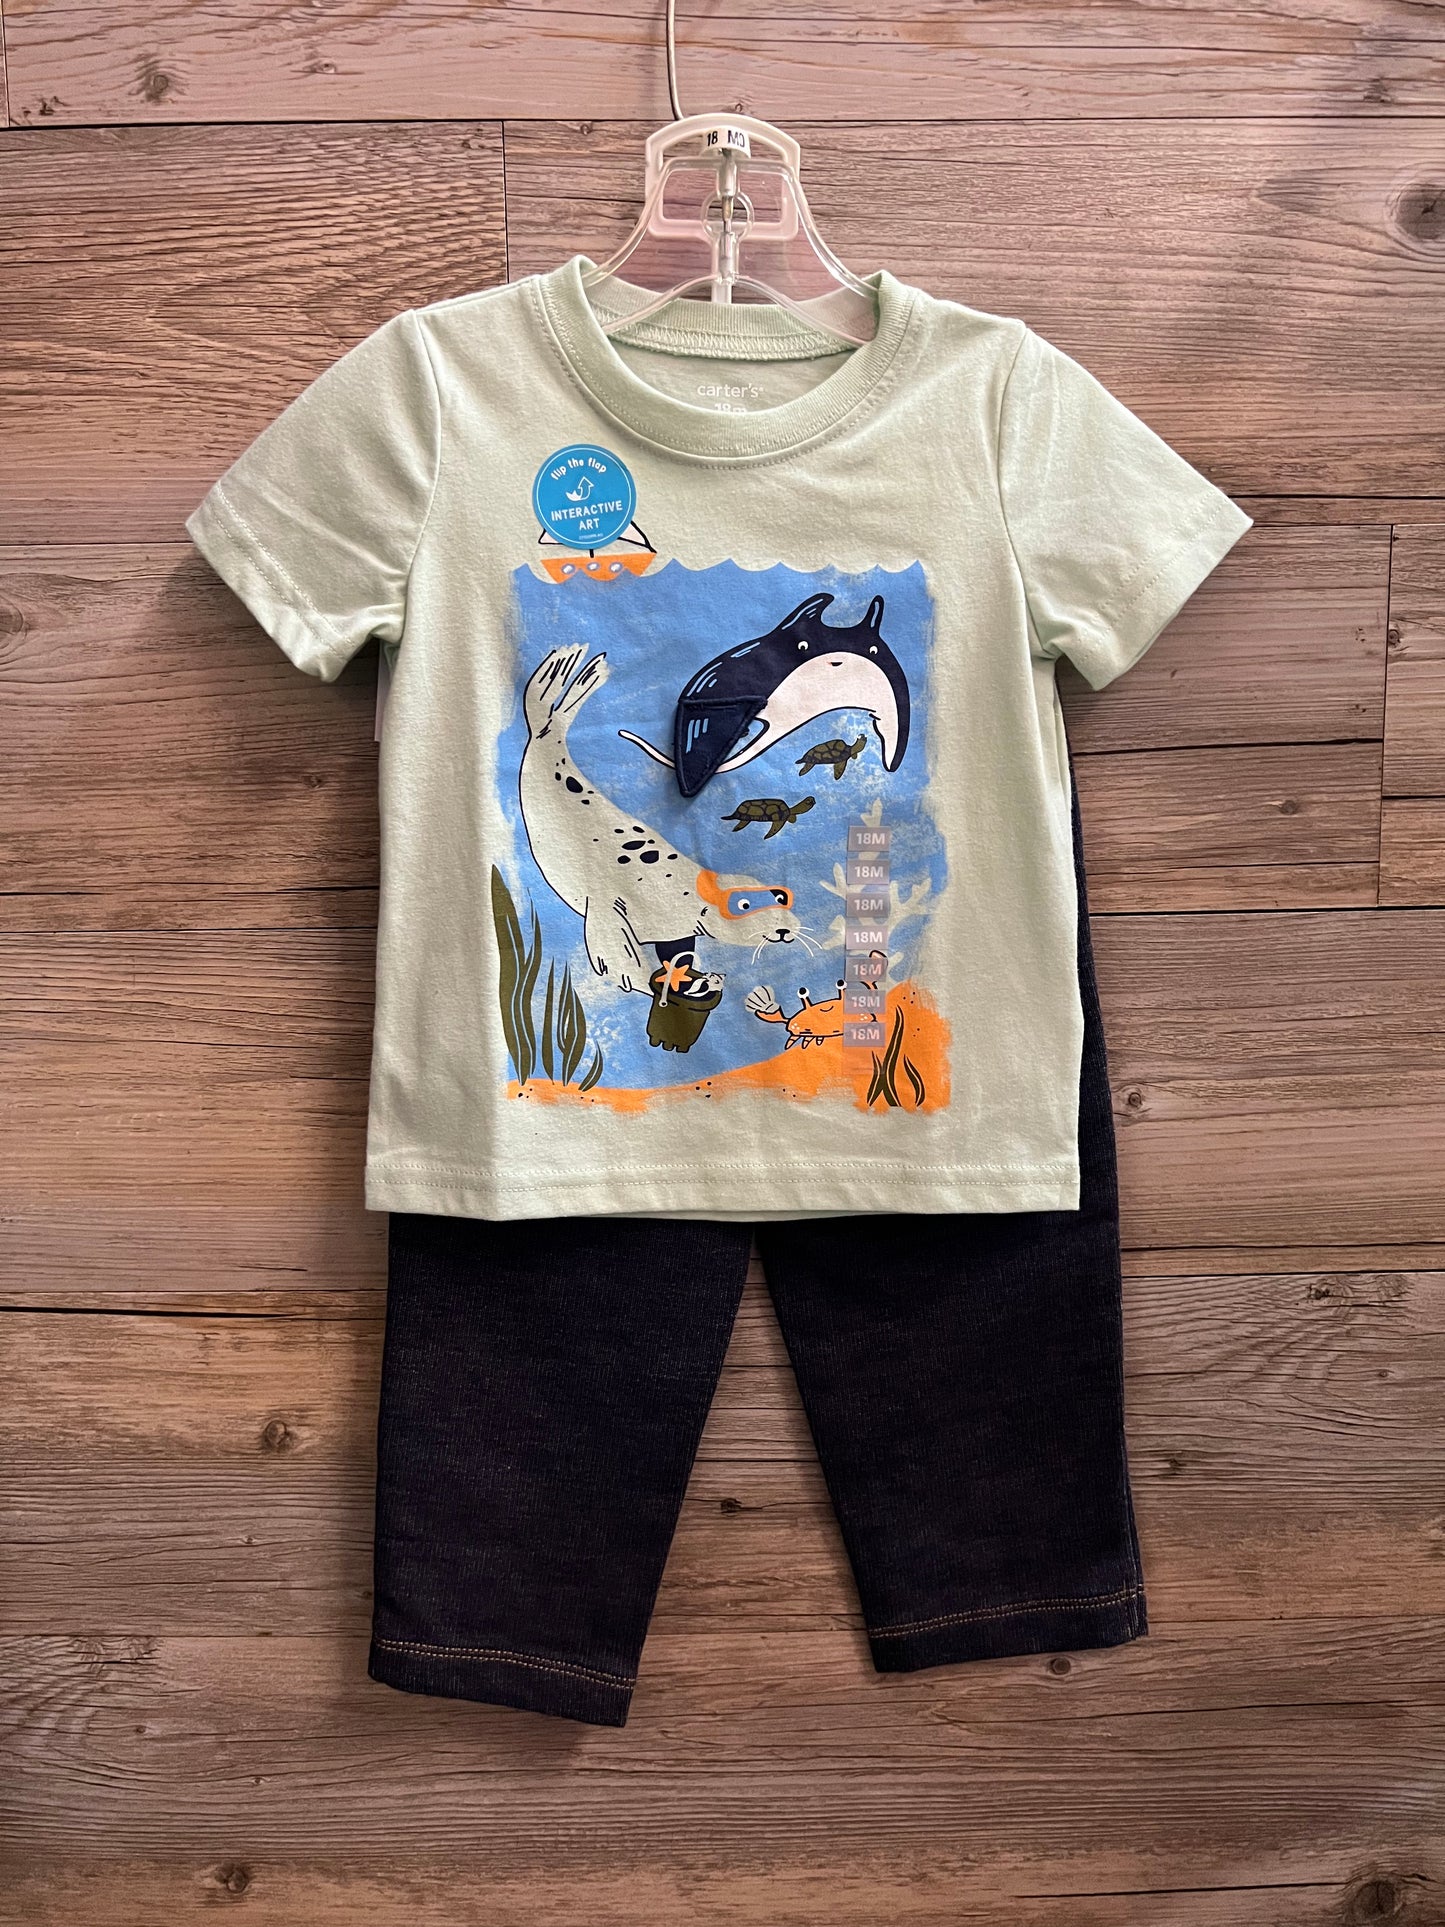 New Carters Interactive Art Tshirt and Pants Set, Size 18M